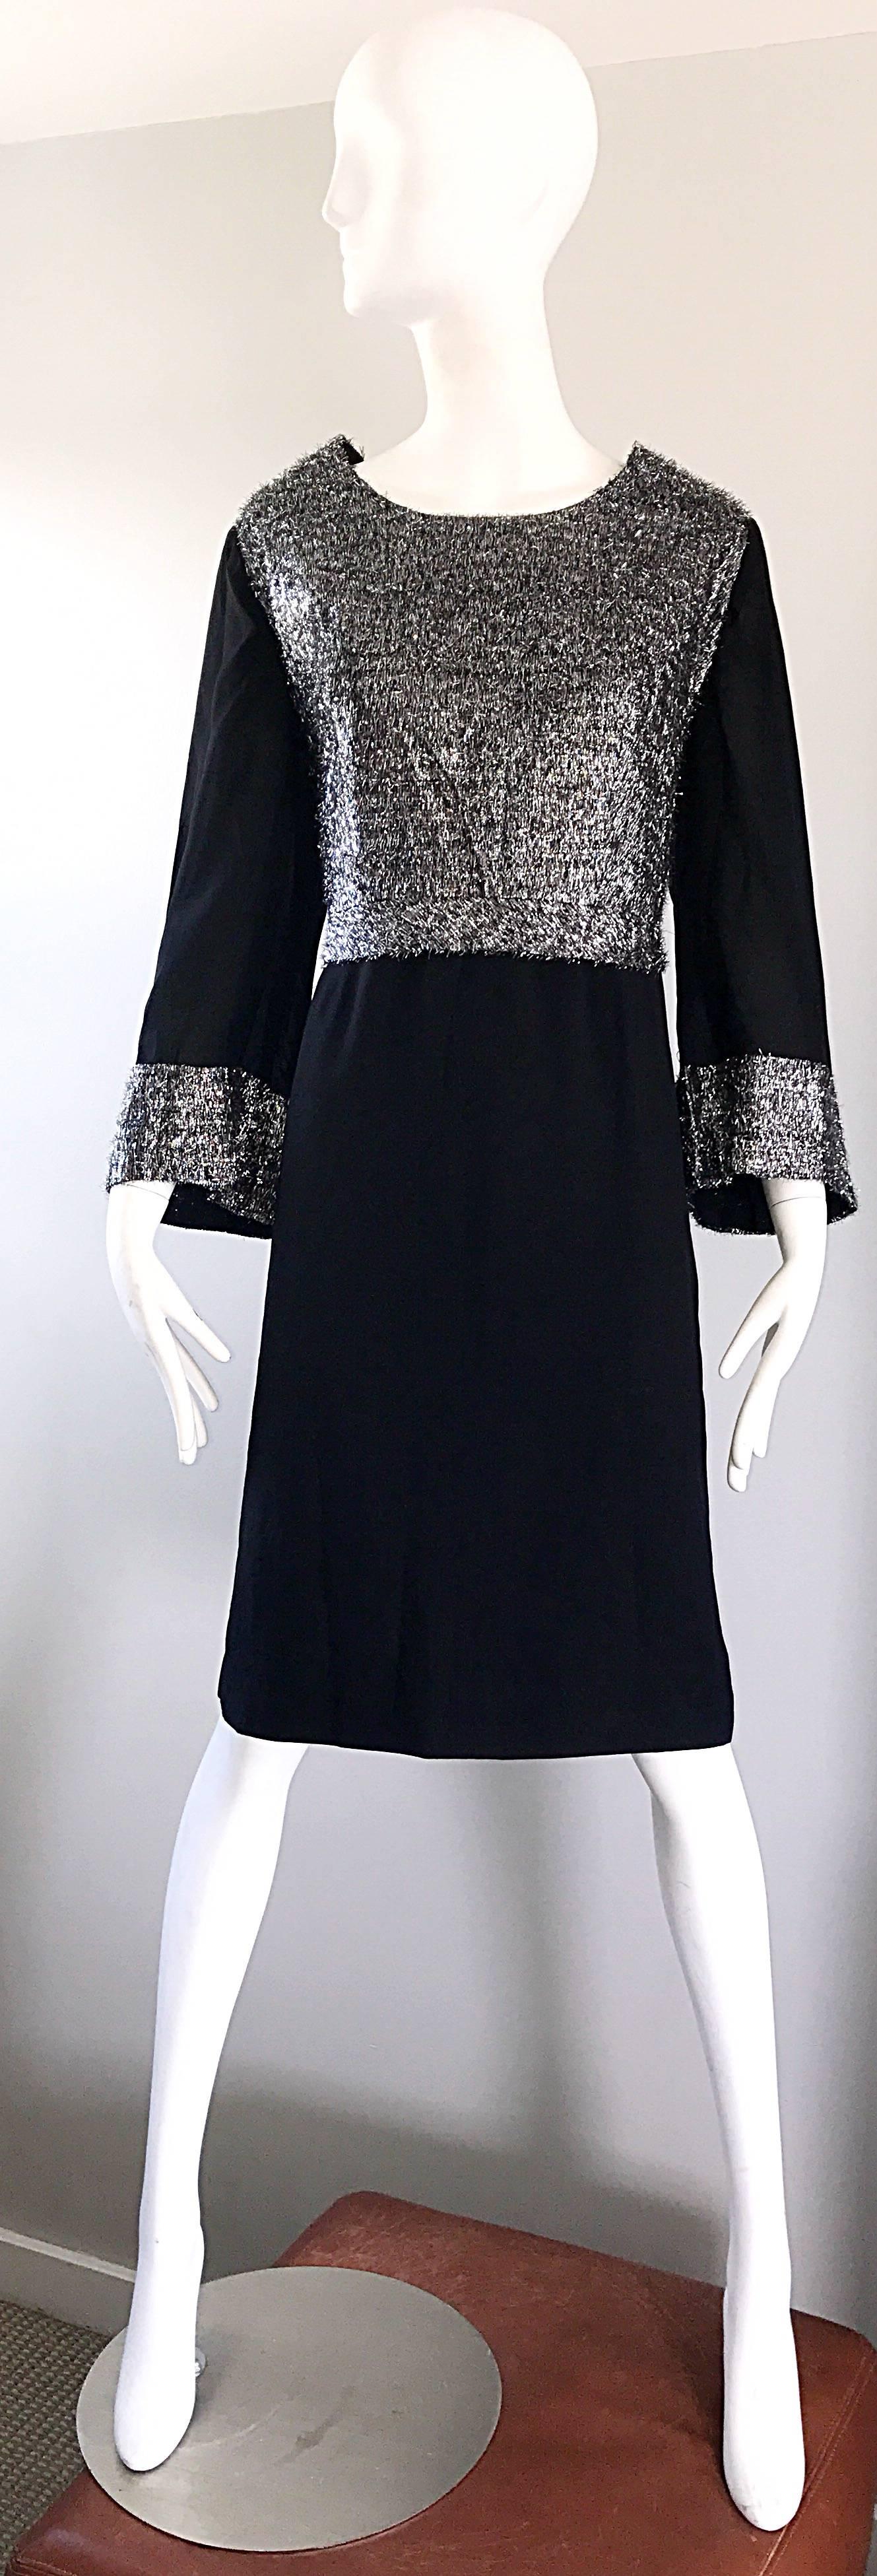 Chic 1960s black and silver crepe rayon plus size dress! Features a tailored silver metallic lurex bodice, with a flattering and forgiving shift shape. Stylish wide bell sleeves. Full metal zipper up the back with hook-and-eye closure. The perfect